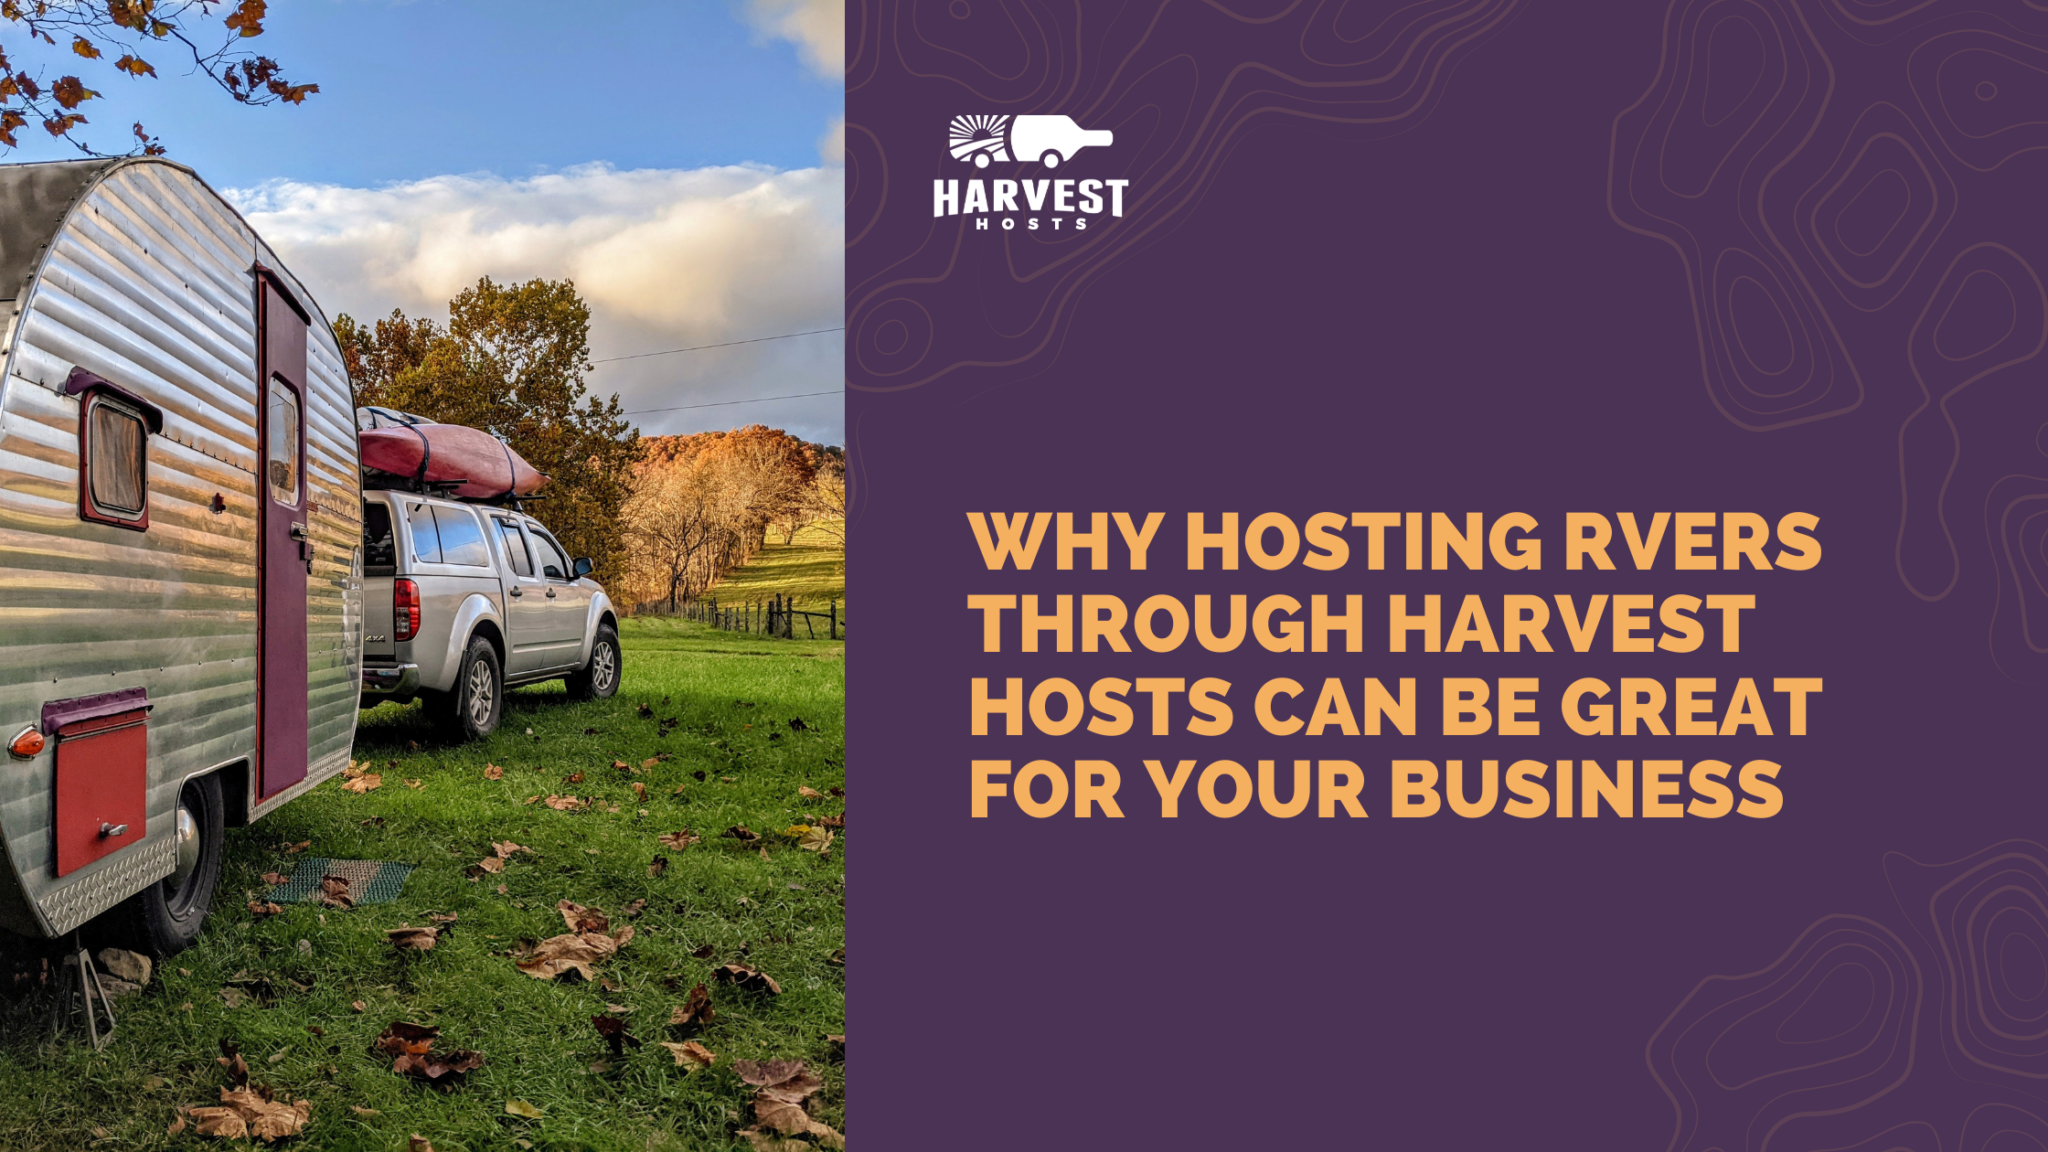 Why Hosting RVers Through Harvest Hosts Can Be Great for Your Business